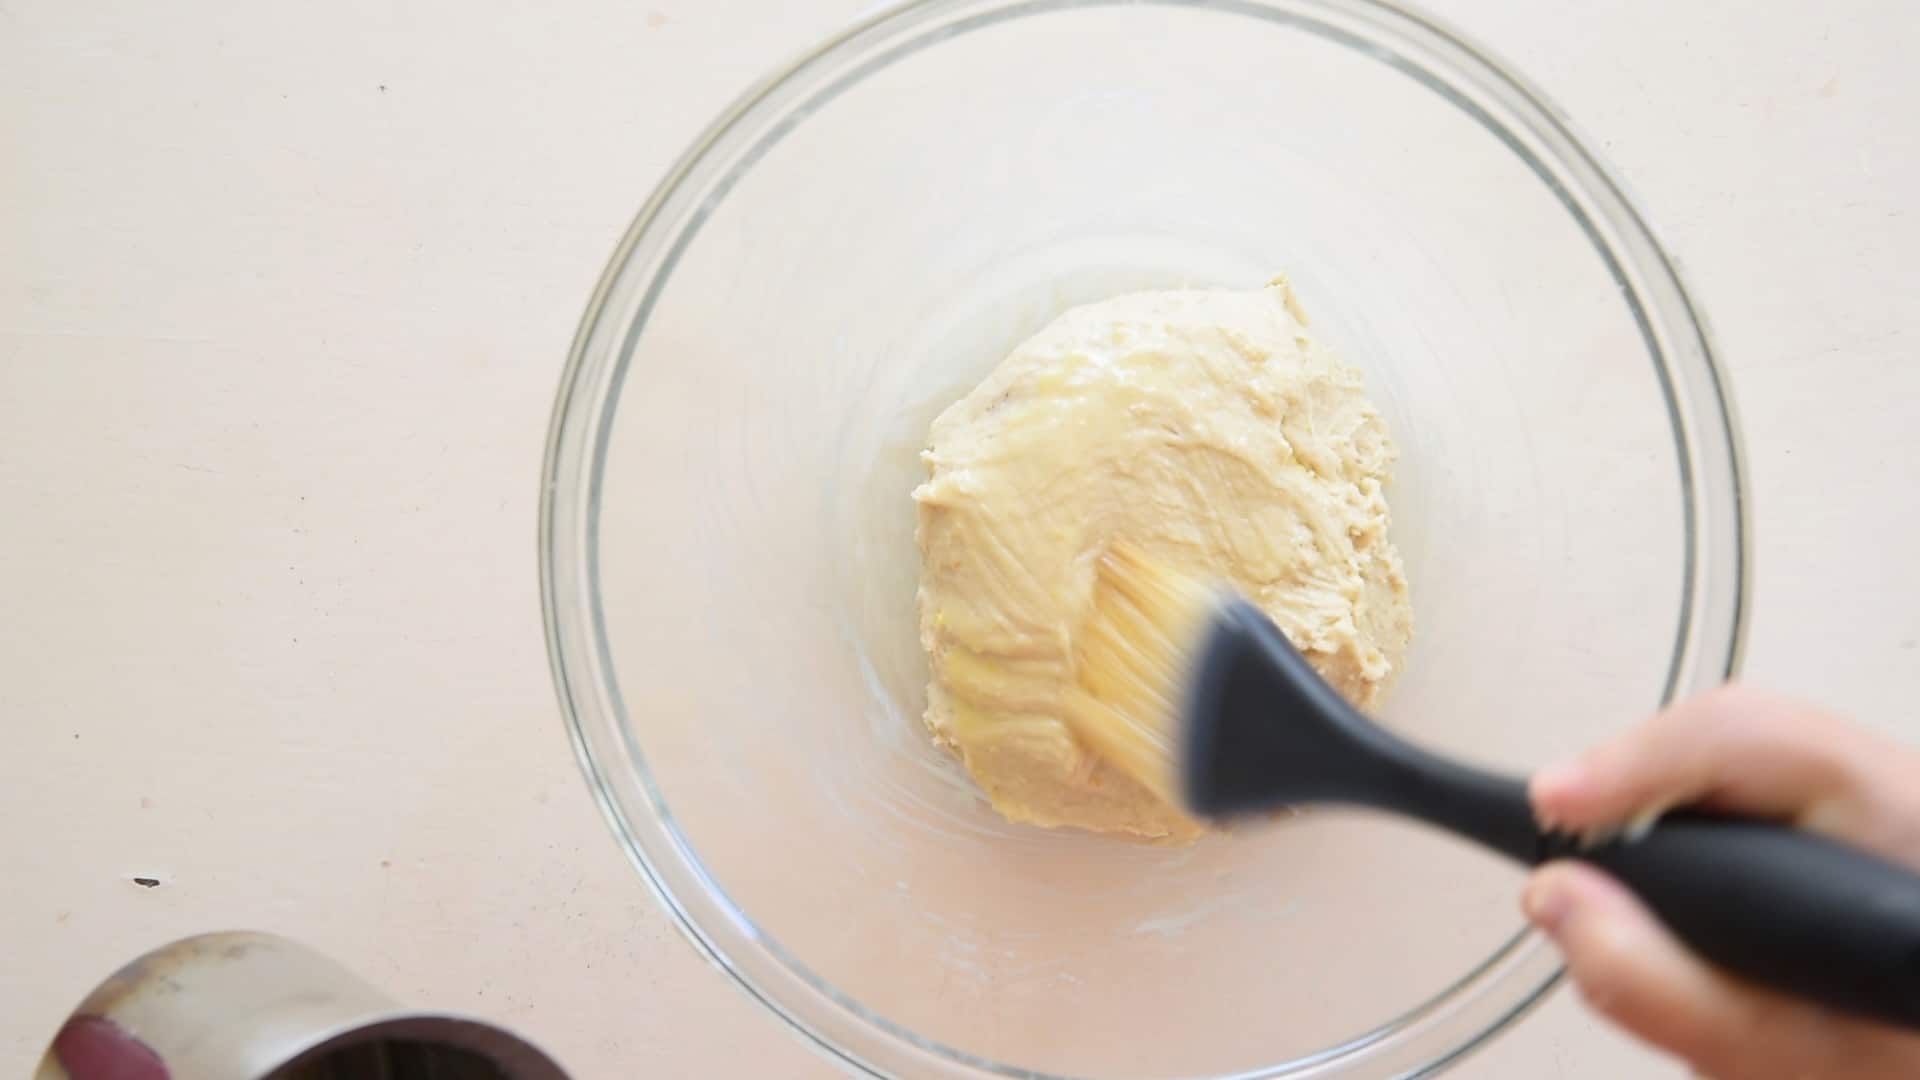 Place the dough into an oiled bowl